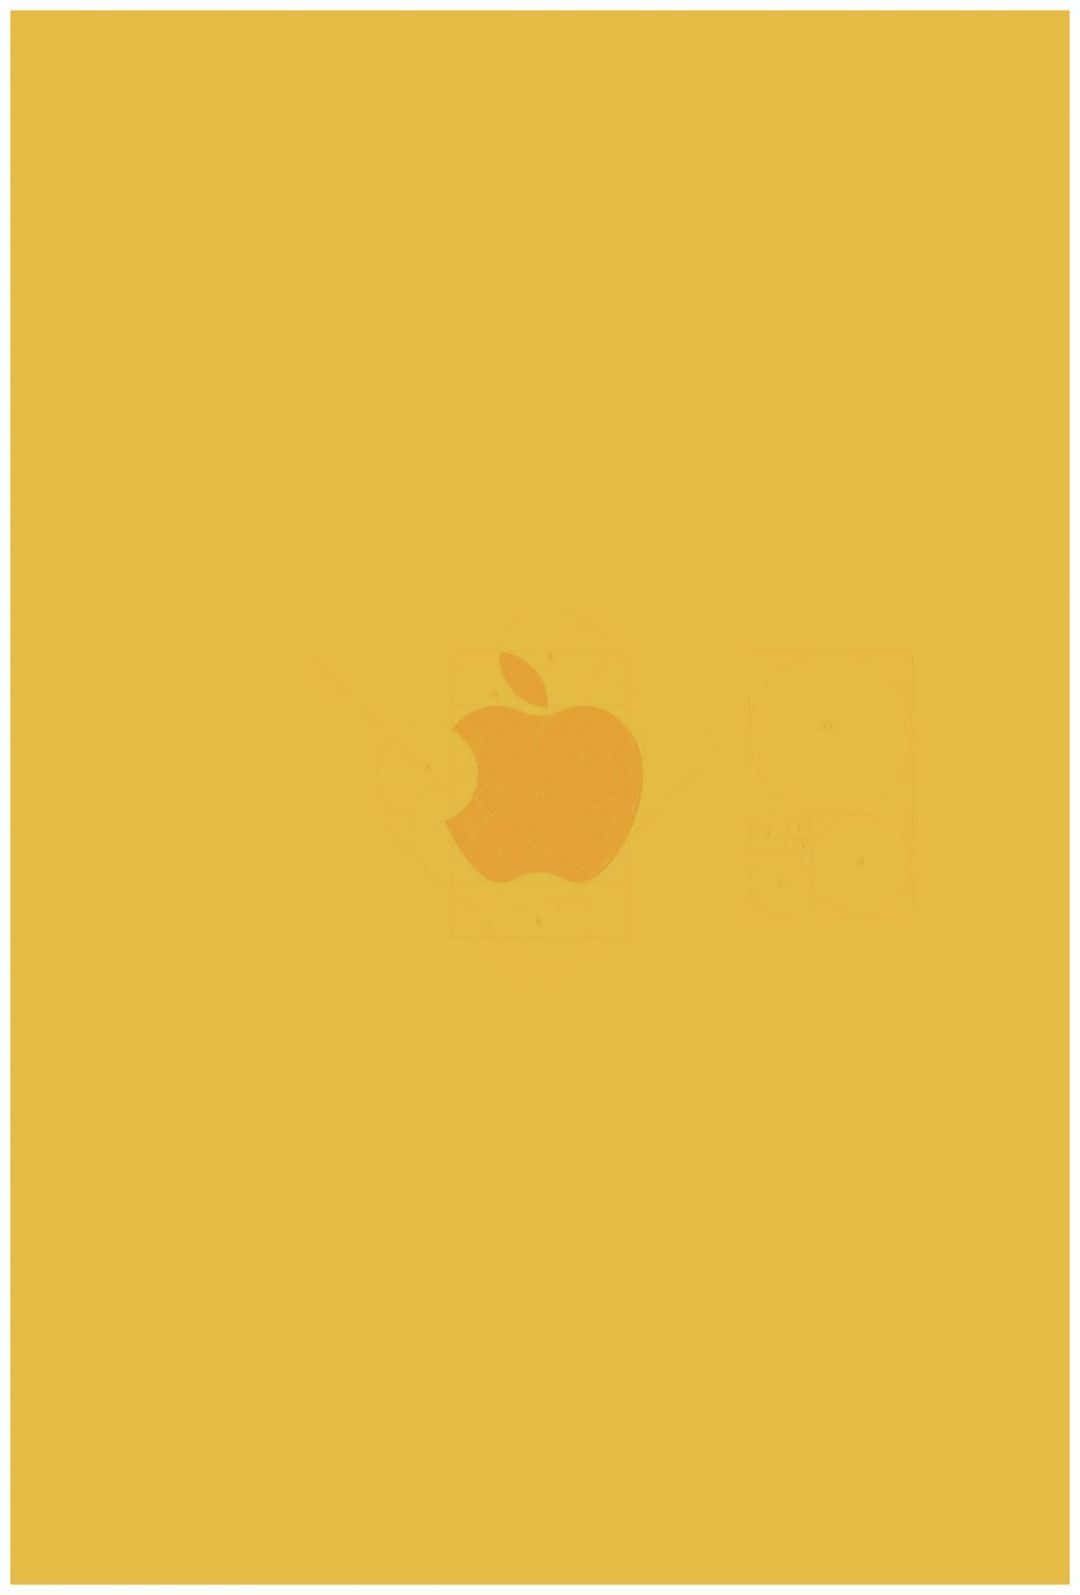 Enjoy The Sun-filled Vibes Of Yellow Aesthetic With The Iphone.